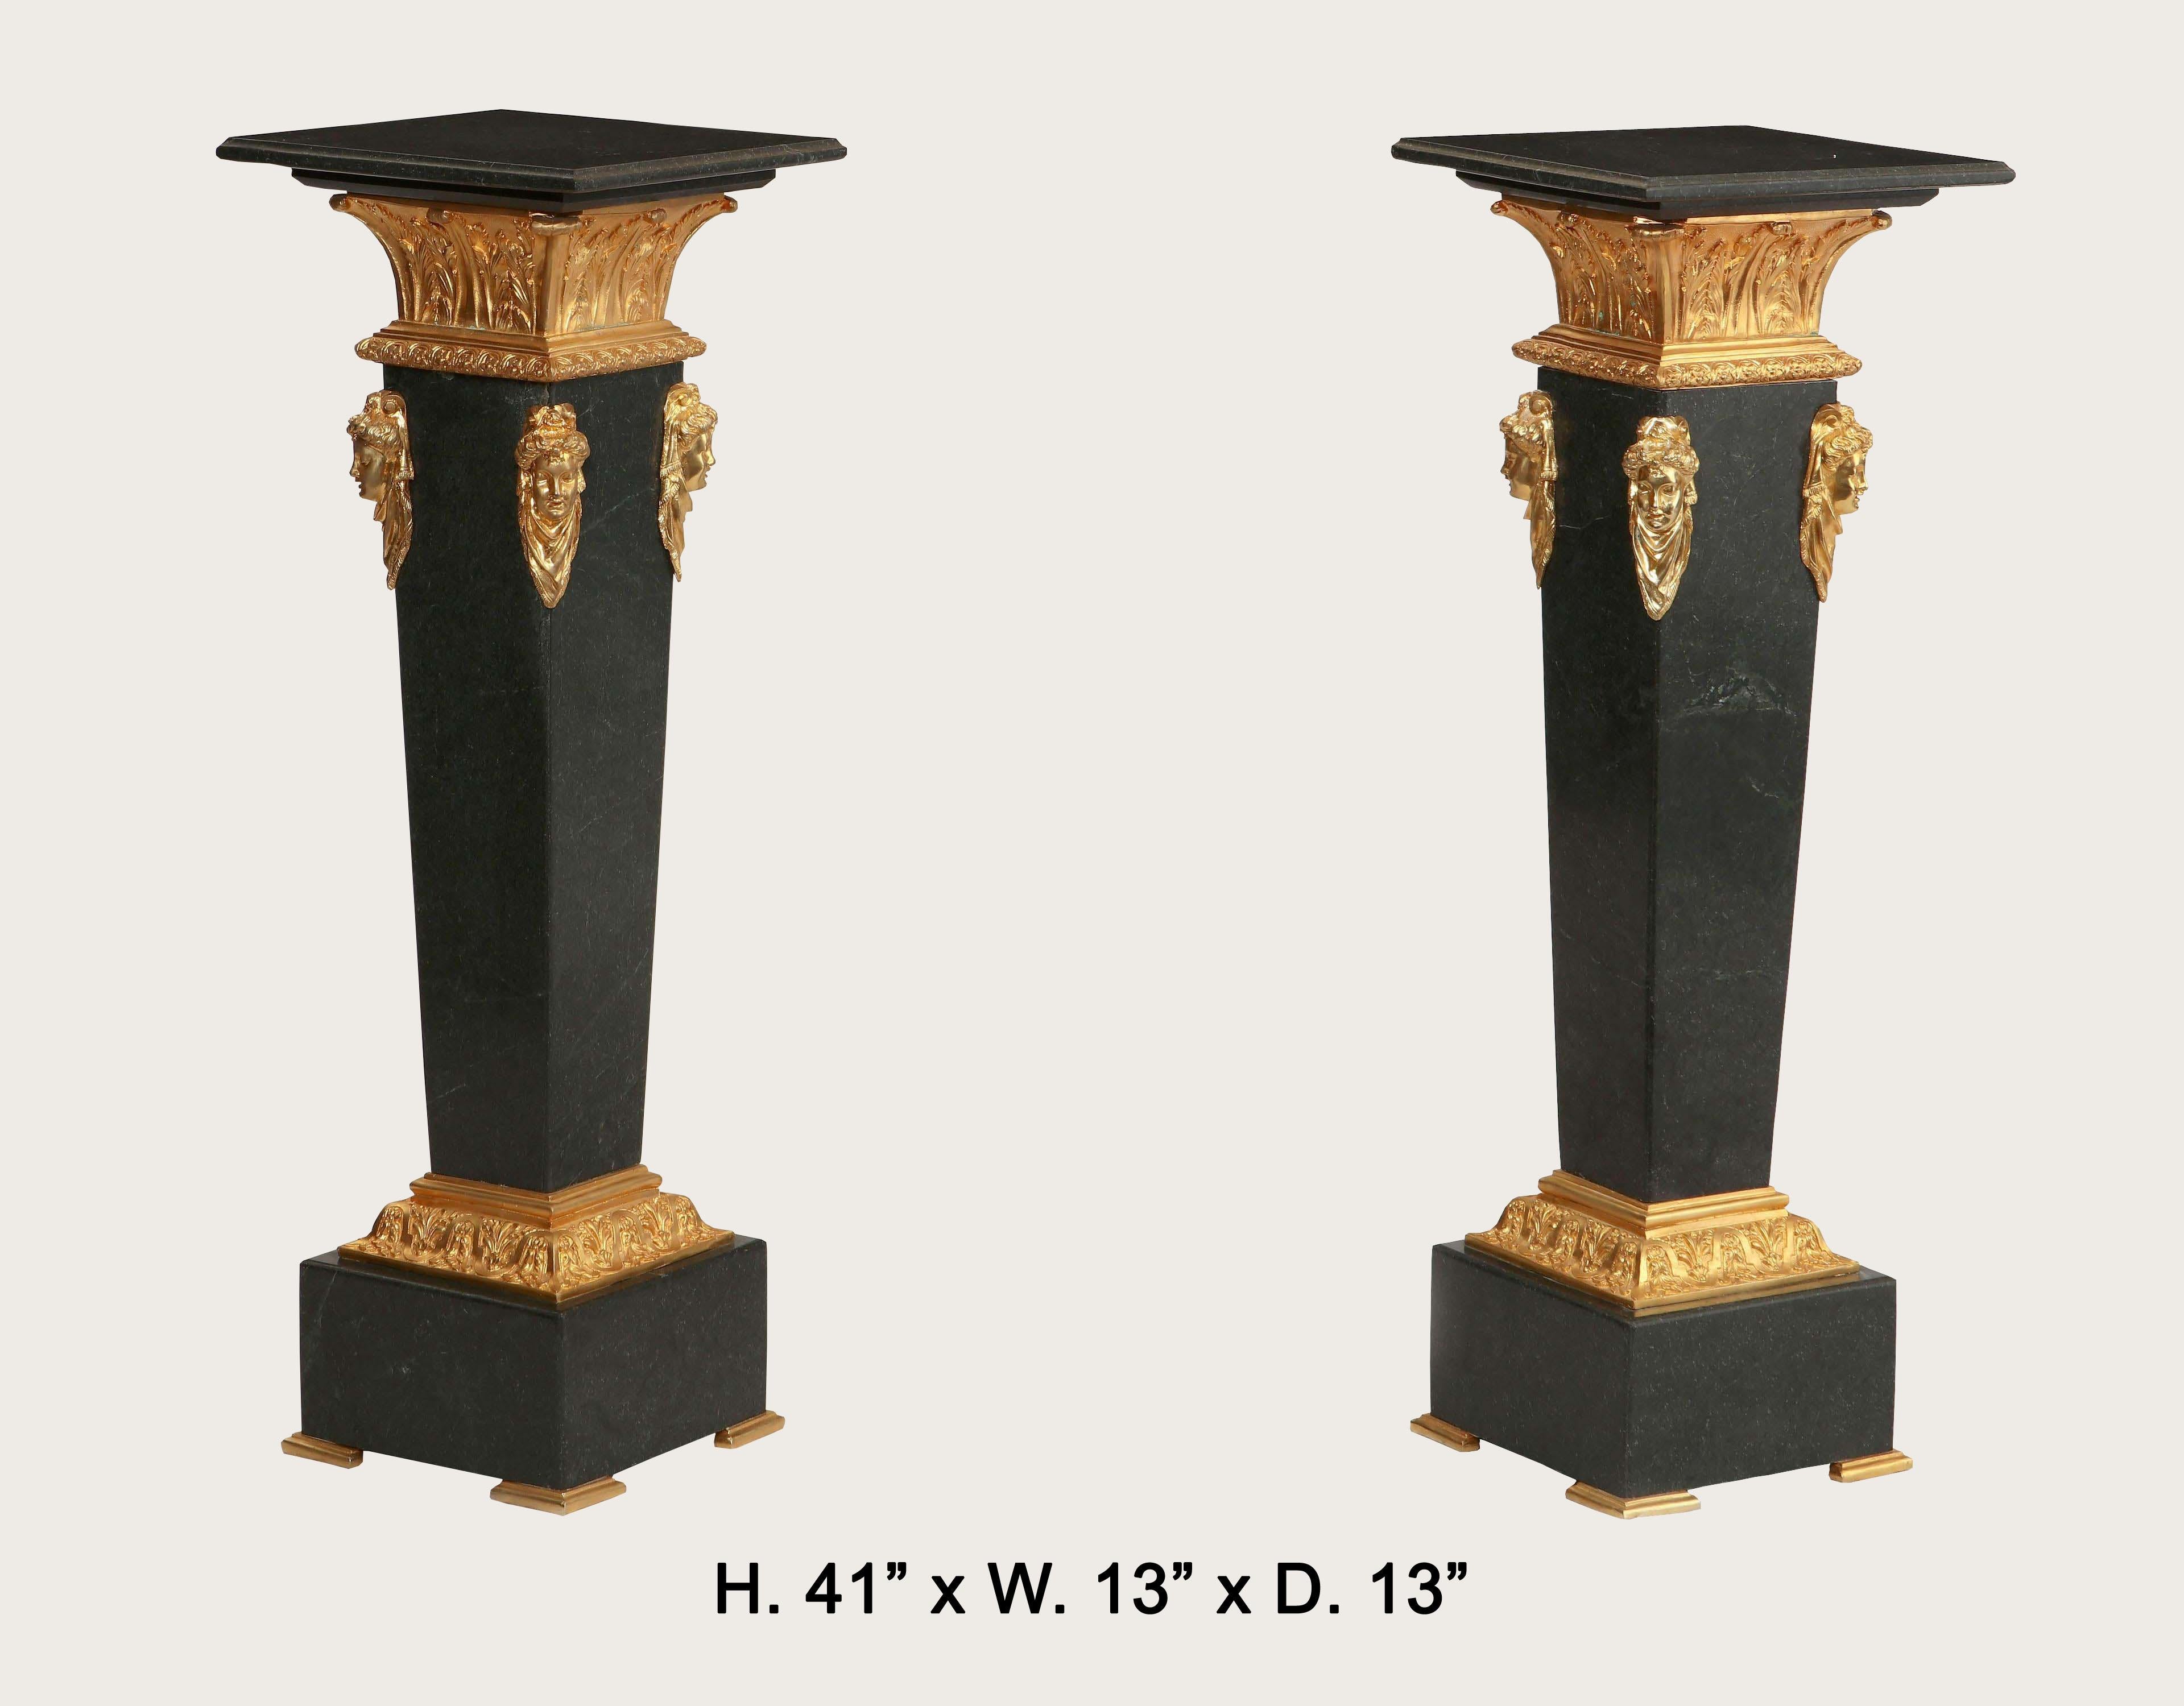 Attractive Pair of Neoclassical style gilt bronze mounted black marble pedestals.
Beautiful ormolu mounts with fine details.
Late 20th century.
